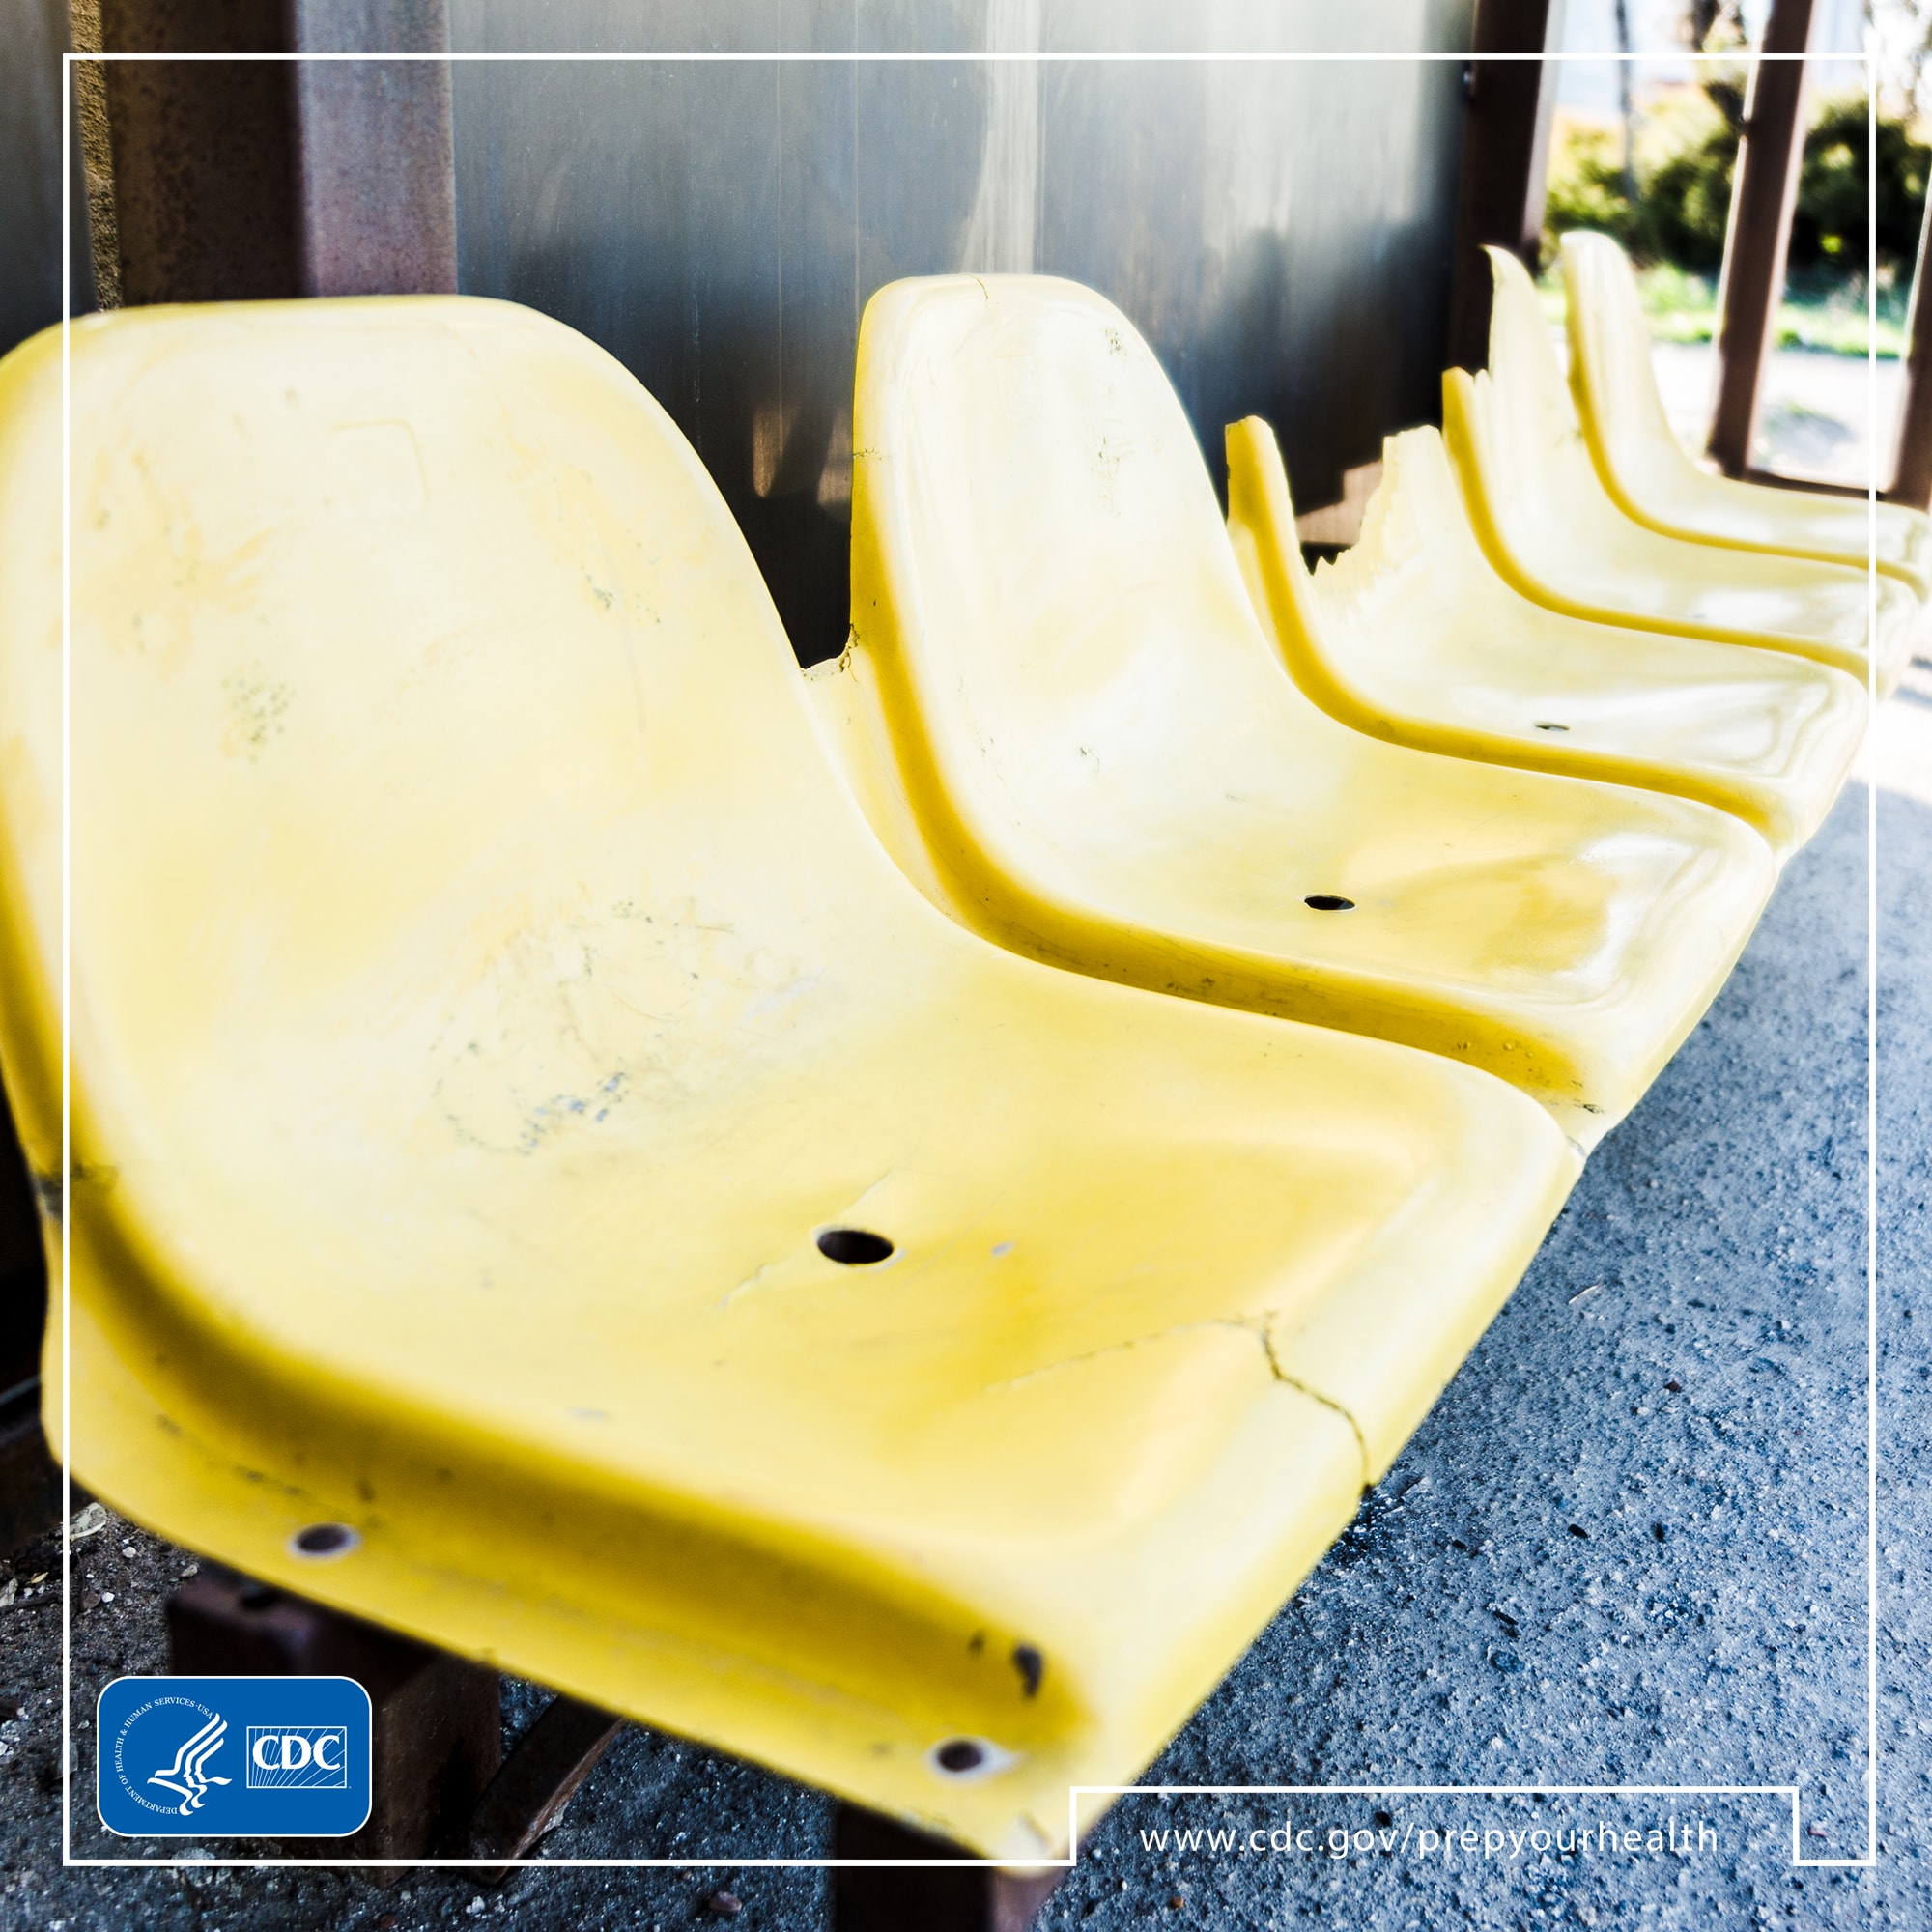 yellow chairs at bus stop